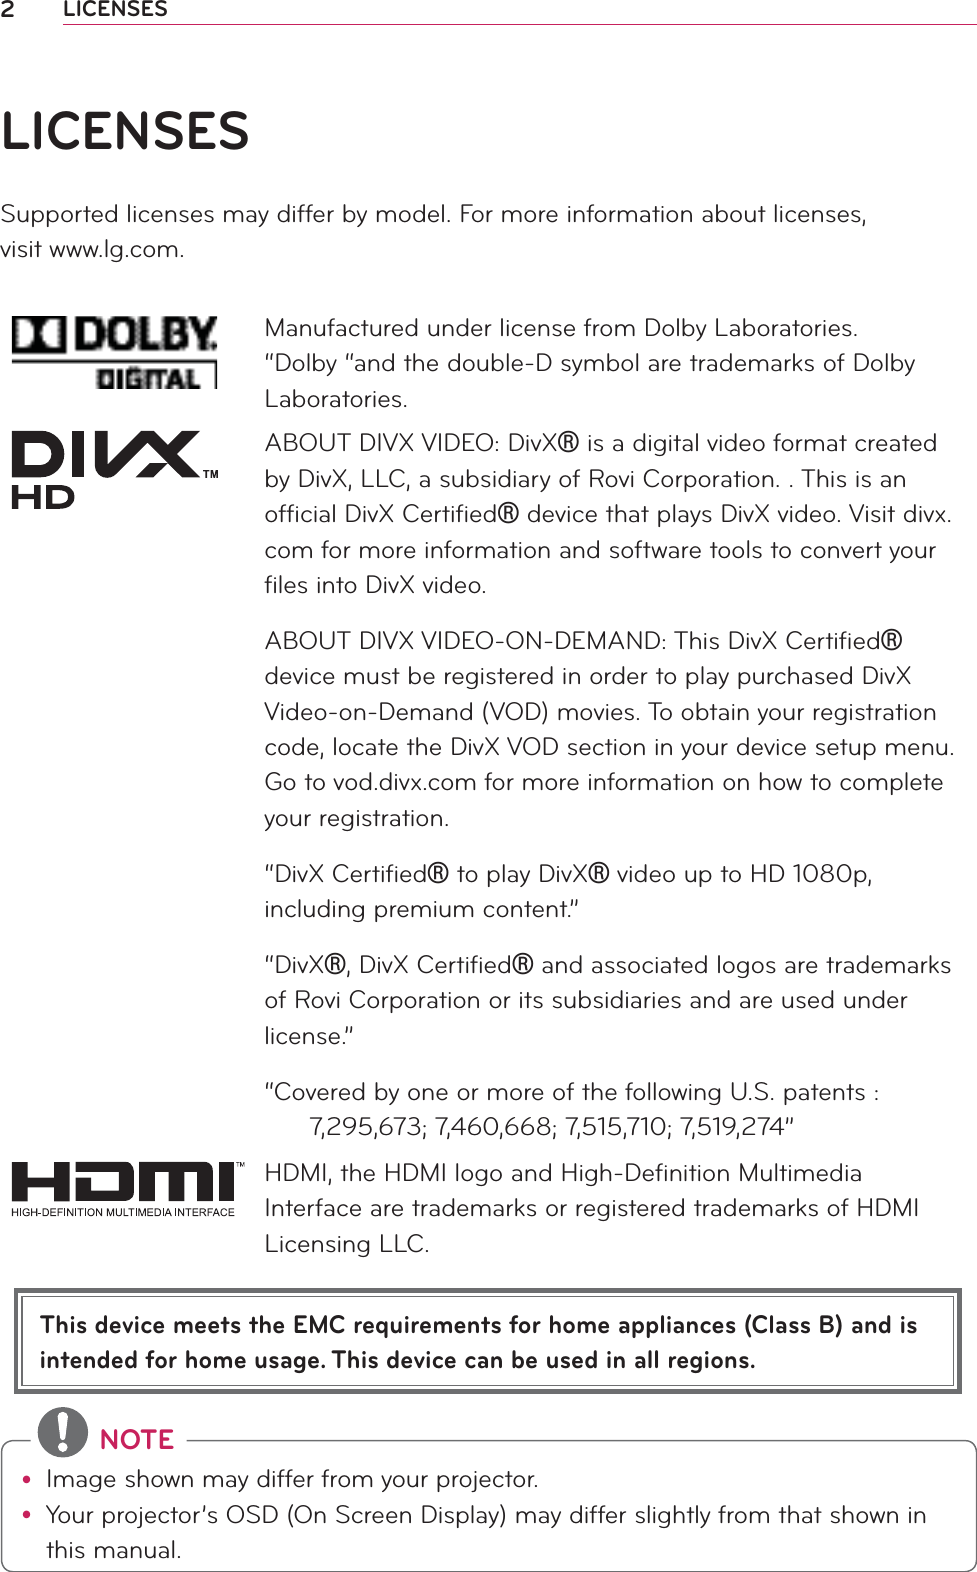 2LICENSESThis device meets the EMC requirements for home appliances (Class B) and is intended for home usage. This device can be used in all regions.LICENSESSupported licenses may differ by model. For more information about licenses,  visit www.lg.com.Manufactured under license from Dolby Laboratories. “Dolby “and the double-D symbol are trademarks of Dolby Laboratories.ABOUT DIVX VIDEO: DivXr is a digital video format created by DivX, LLC, a subsidiary of Rovi Corporation. . This is an ofﬁcial DivX Certiﬁedr device that plays DivX video. Visit divx.com for more information and software tools to convert your ﬁles into DivX video.ABOUT DIVX VIDEO-ON-DEMAND: This DivX Certiﬁedr device must be registered in order to play purchased DivX Video-on-Demand (VOD) movies. To obtain your registration code, locate the DivX VOD section in your device setup menu. Go to vod.divx.com for more information on how to complete your registration. “DivX Certiﬁedr to play DivXr video up to HD 1080p, including premium content.”“DivXr, DivX Certiﬁedr and associated logos are trademarks of Rovi Corporation or its subsidiaries and are used under license.”“Covered by one or more of the following U.S. patents :        7,295,673; 7,460,668; 7,515,710; 7,519,274”HDMI, the HDMI logo and High-Deﬁnition Multimedia Interface are trademarks or registered trademarks of HDMI Licensing LLC. NOTEy Image shown may differ from your projector.y Your projector’s OSD (On Screen Display) may differ slightly from that shown in this manual.